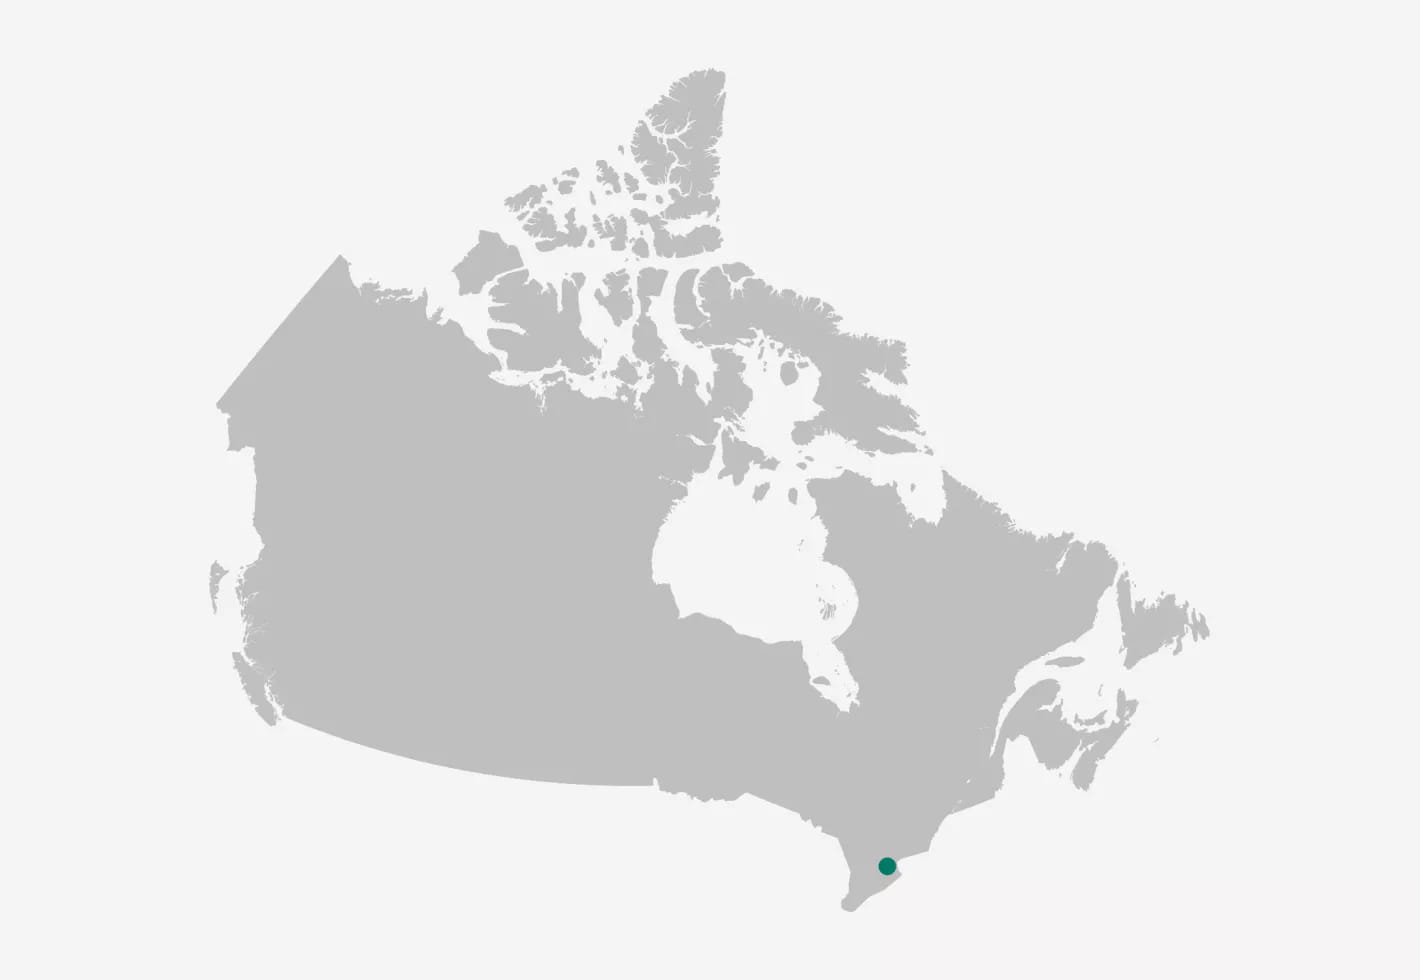 Our presence in Canada